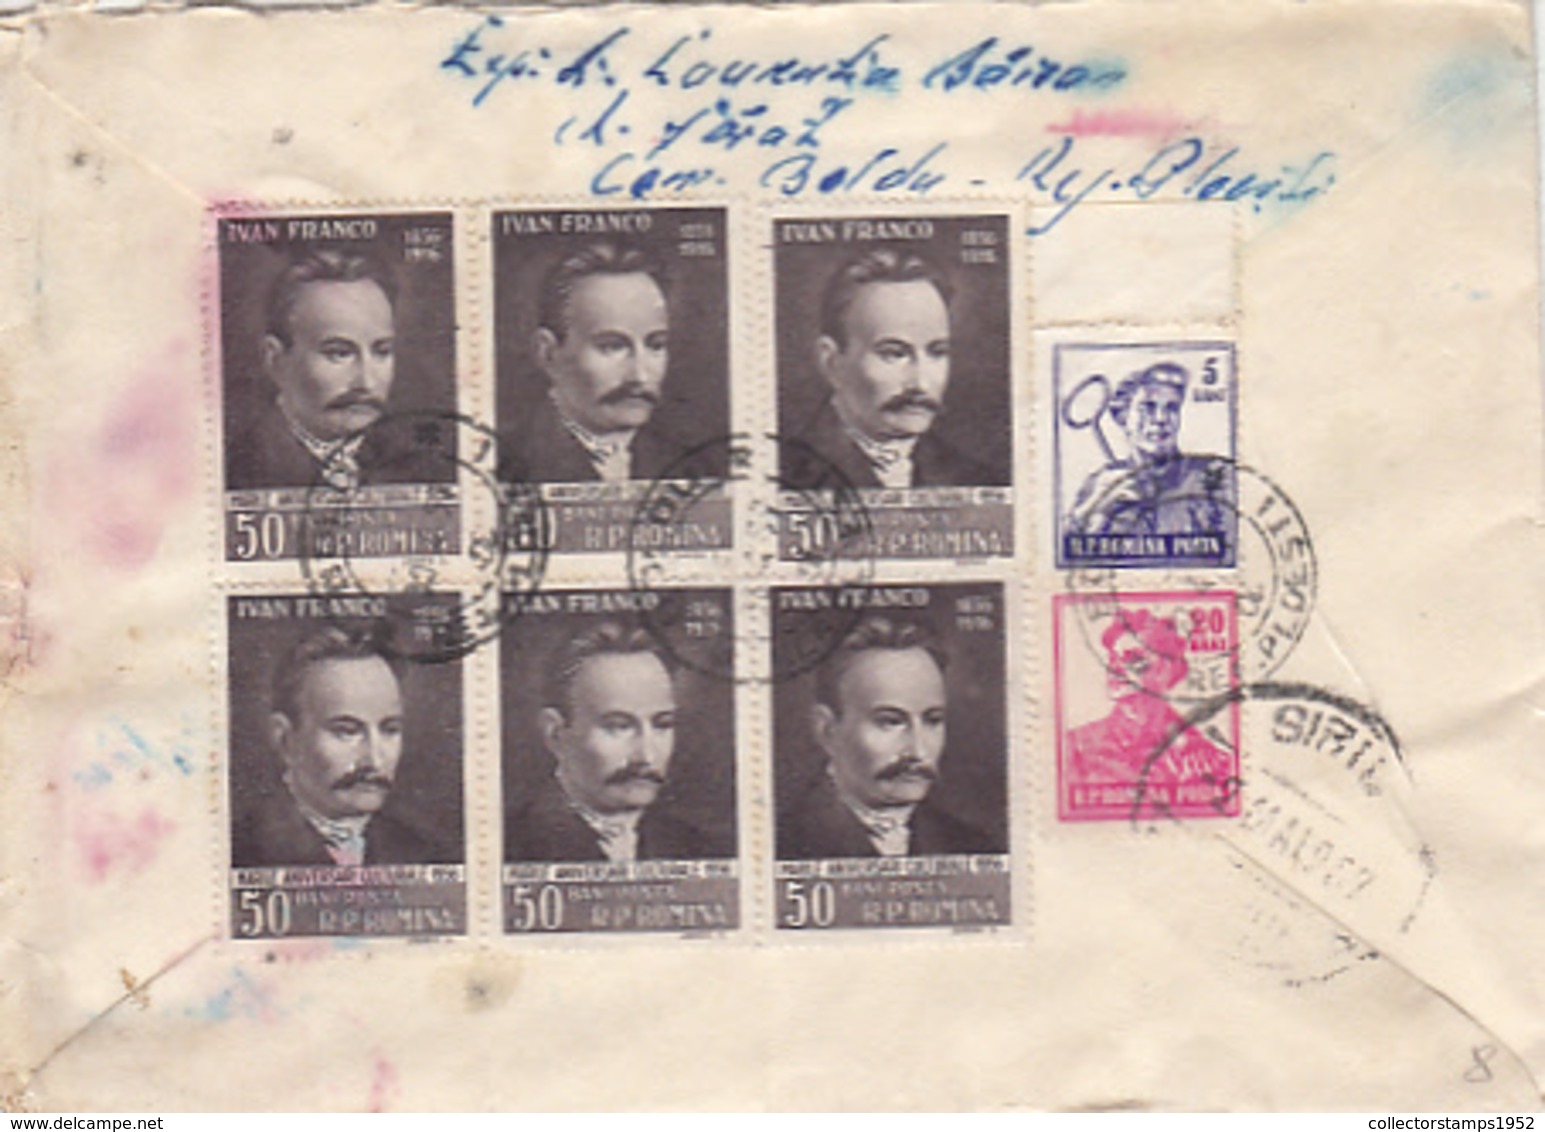 84158-MINER, WELDER, IVAN FRANCO, STAMPS ON REGISTERED COVER, 1957, ROMANIA - Covers & Documents